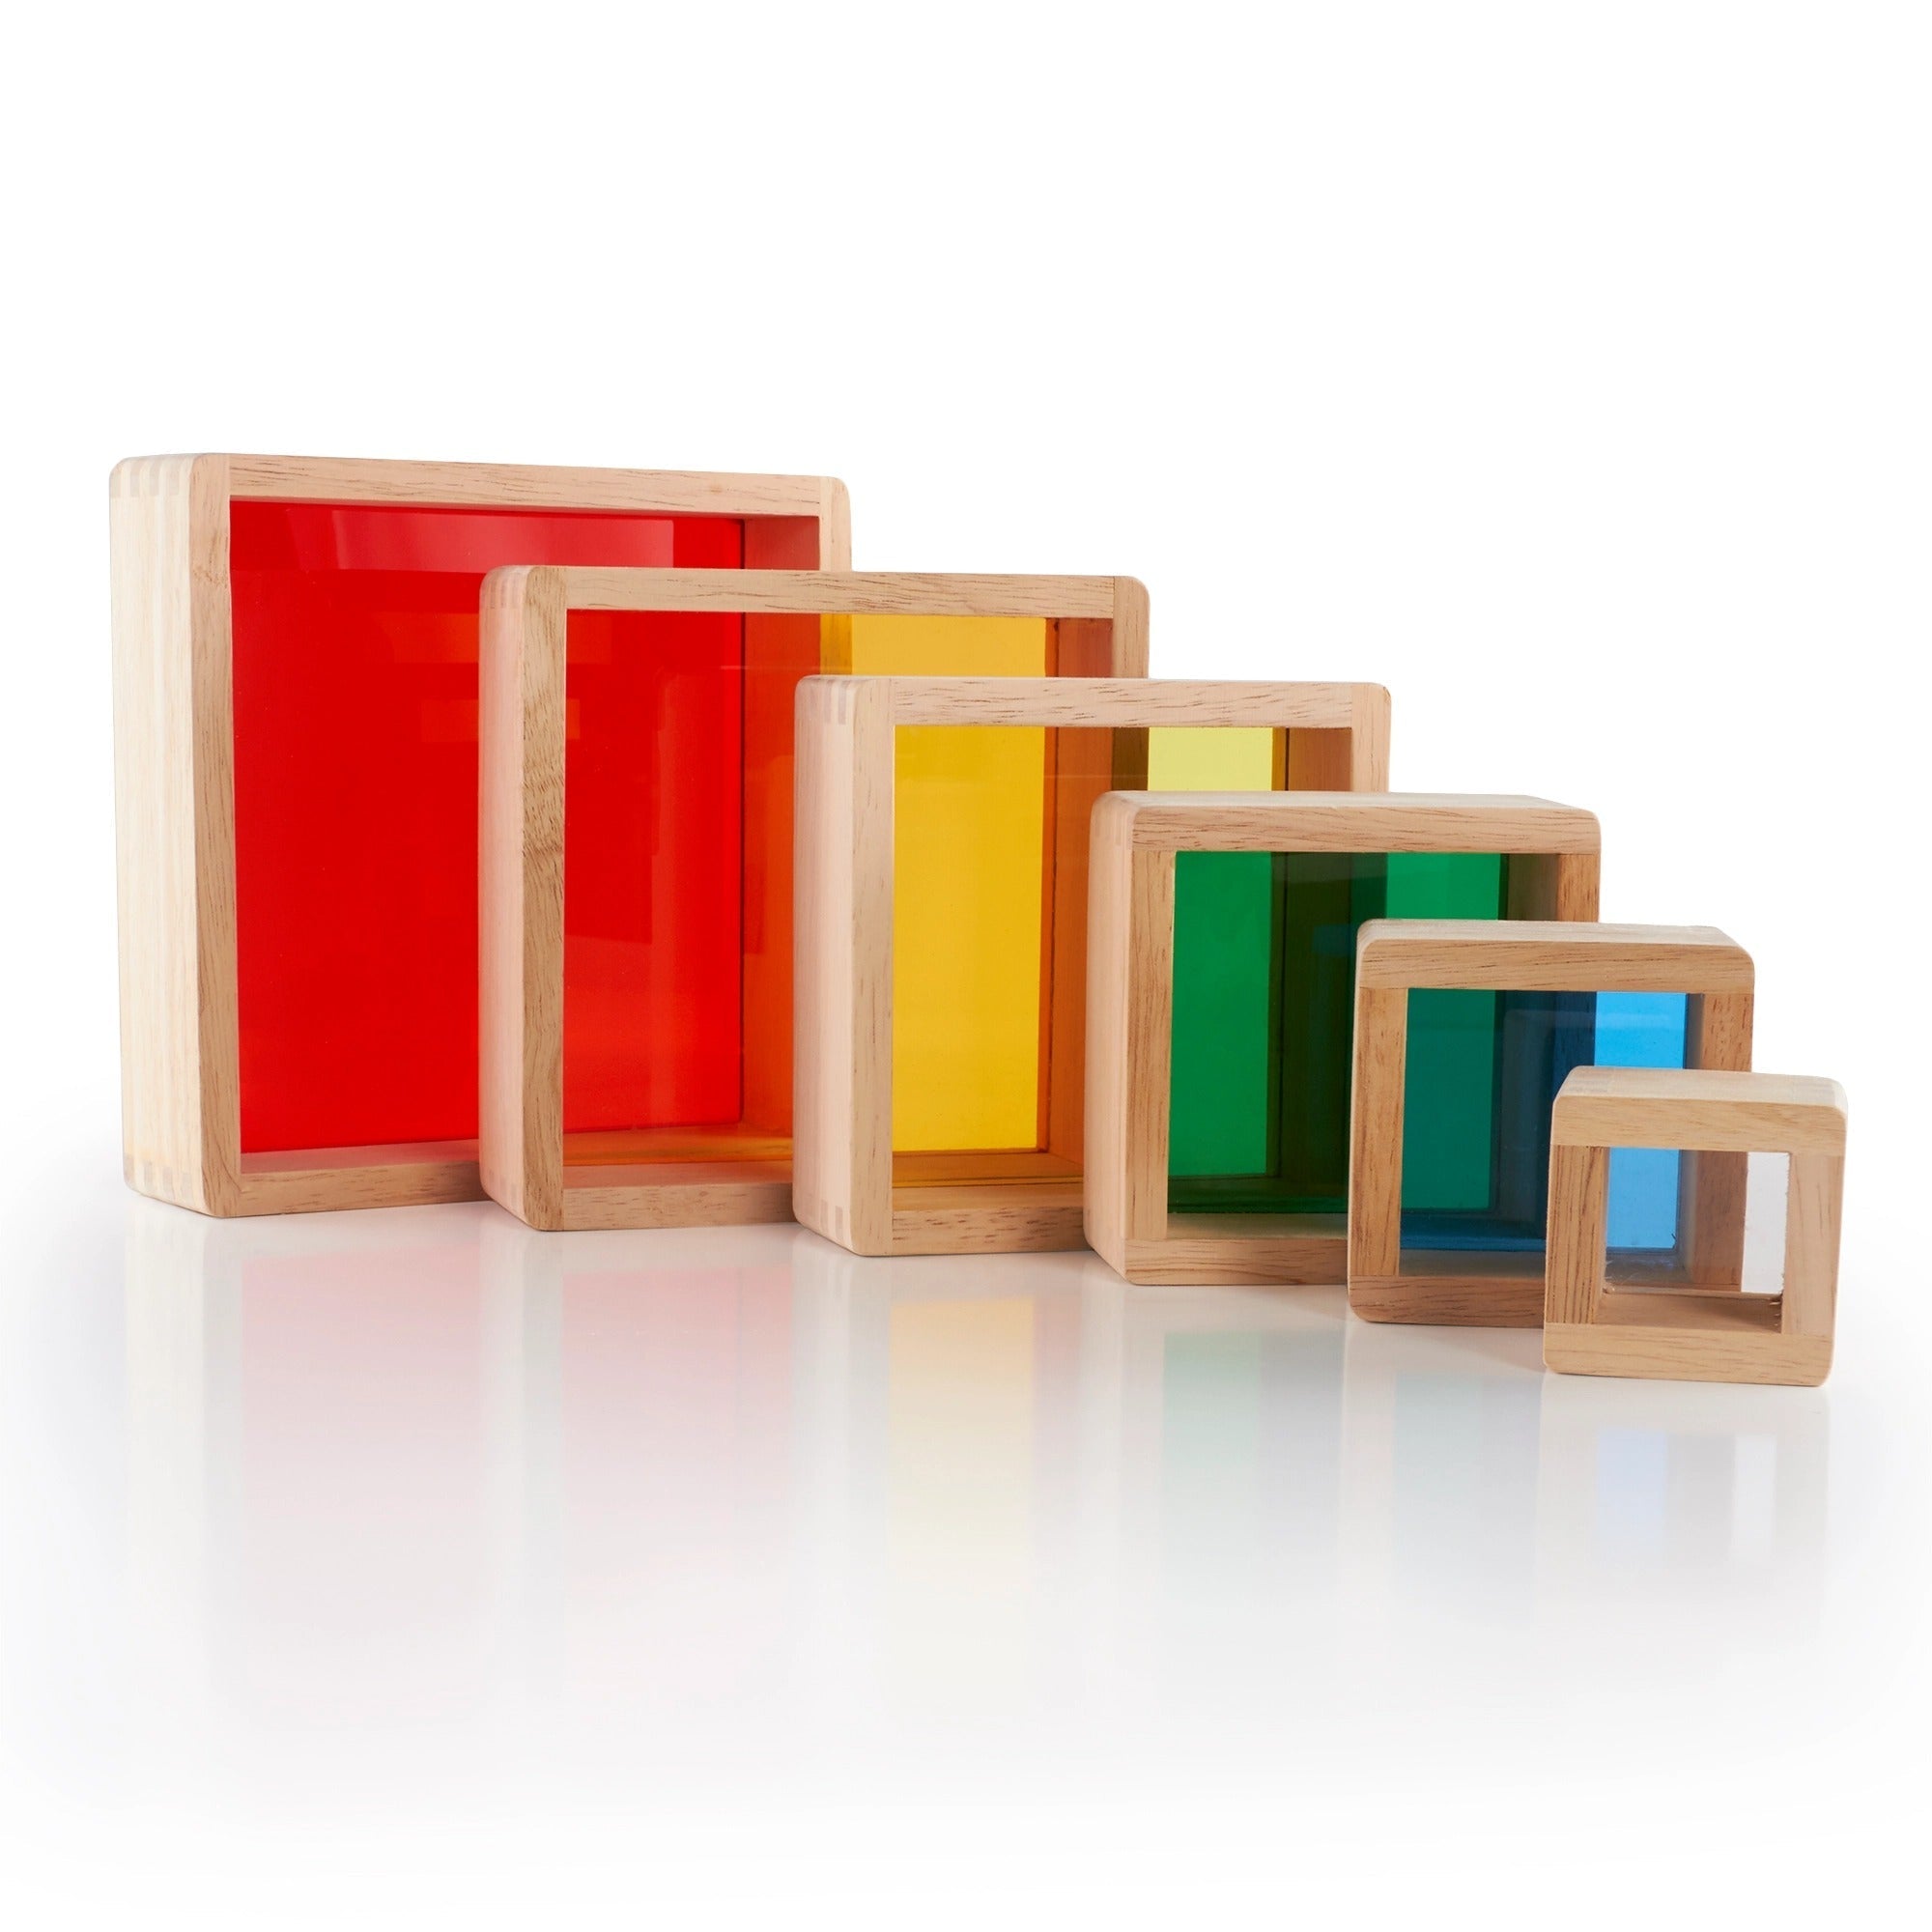 Guidecraft Stacking Rainbow Pyramid, Six hardwood Guidecraft Stacking Rainbow Pyramid squares featuring inset coloured plexi for stacking, sorting, building, sequencing and creating imaginative, colourful constructions! The Guidecraft Stacking Rainbow Pyramid doubles as a stand-alone manipulative or an addition to hardwood block construction. The Guidecraft Stacking Rainbow Pyramid have hardwood frames, rounded corners and edges, and inset acrylic windows. Solid wood frames with inset coloured acrylic windo